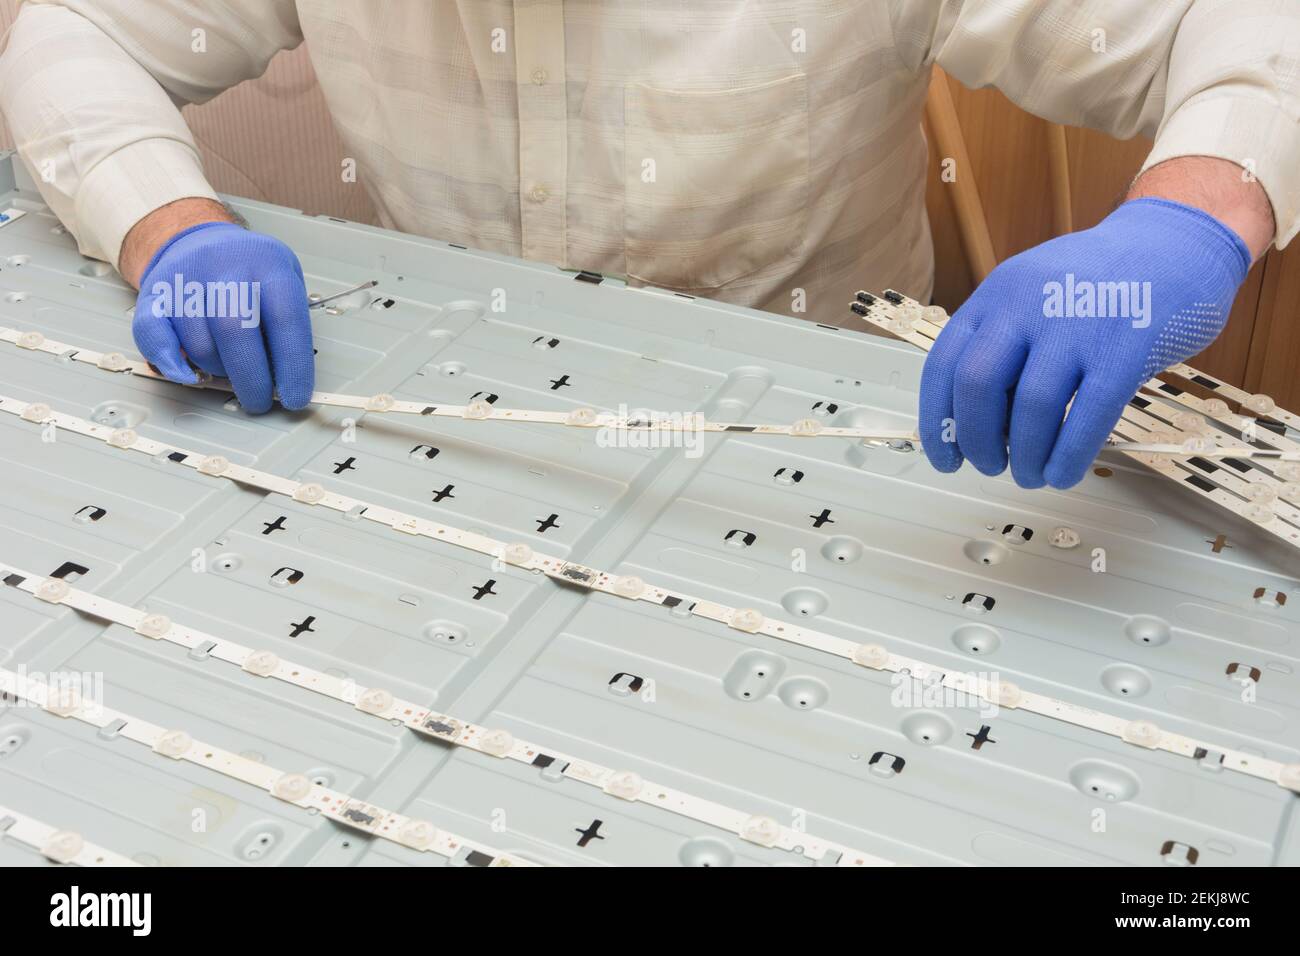 Repair of LCD TV. Replacing LED chambers on large monitor panel in service center. Stock Photo